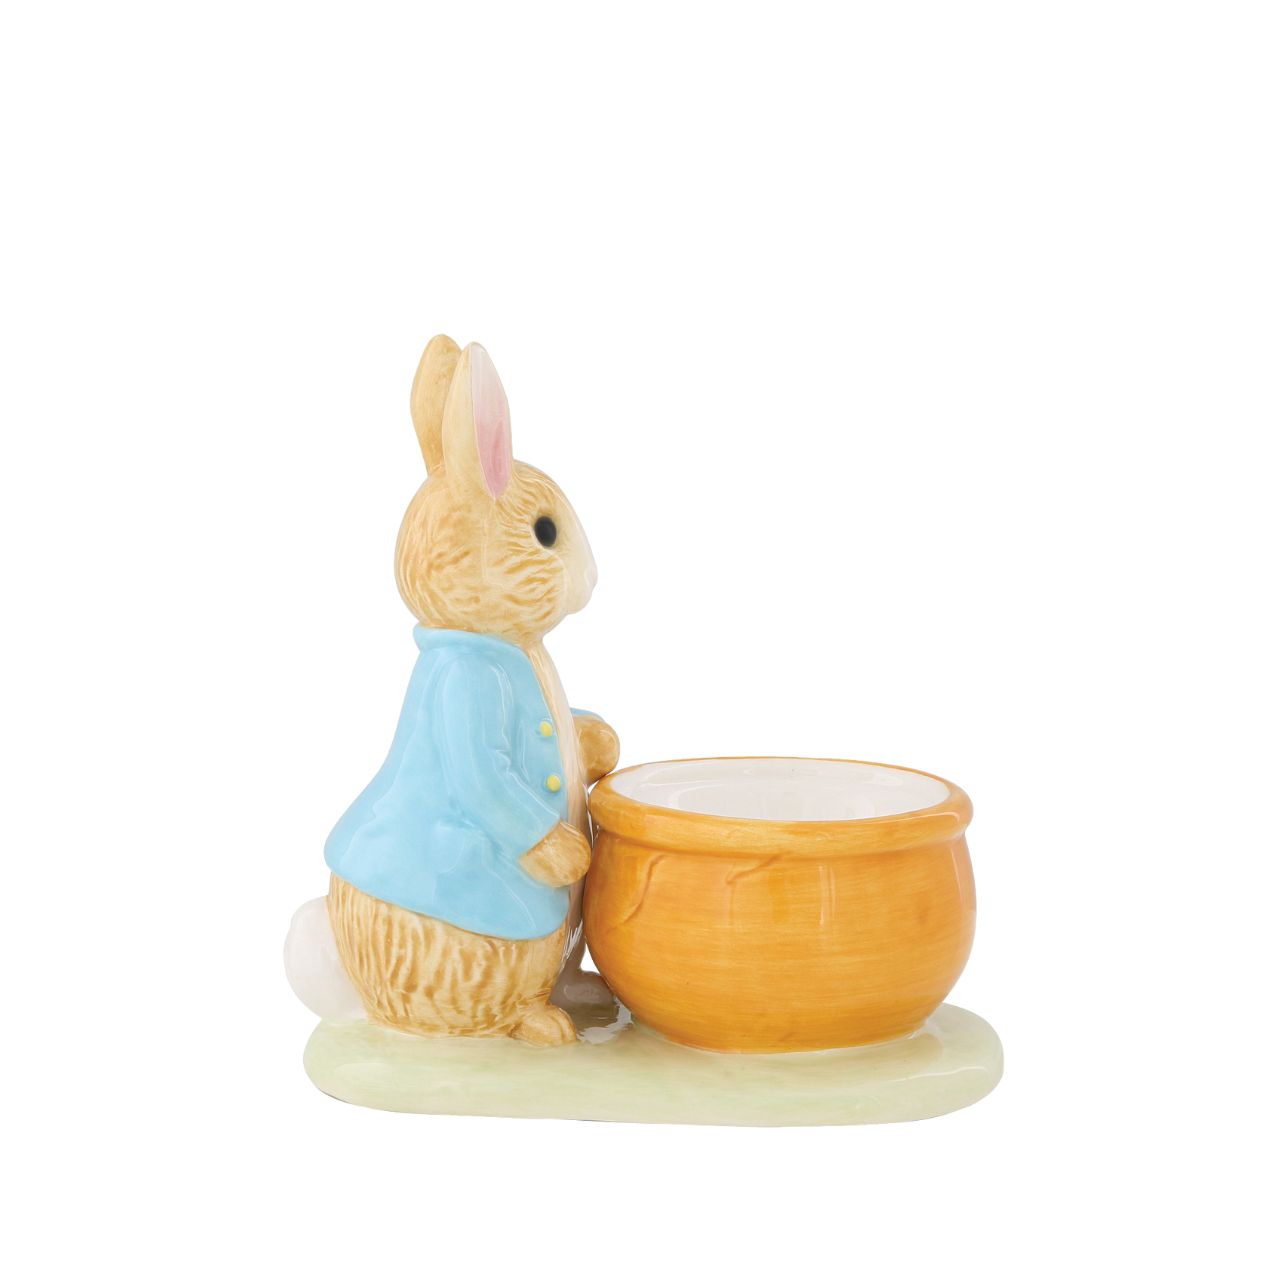 Peter Rabbit Egg Cup  Serve your morning eggs in style with our unique and charming Peter Rabbit egg cup, because regular egg cups aren't all they're cracked up to be...This beautiful Beatrix Potter egg cup has been made from sturdy ceramic and makes the ideal collector's piece or gift. We recommend you use large eggs to feel the true benefit, or why not fill with mini chocolate eggs for a sweet easter gift.